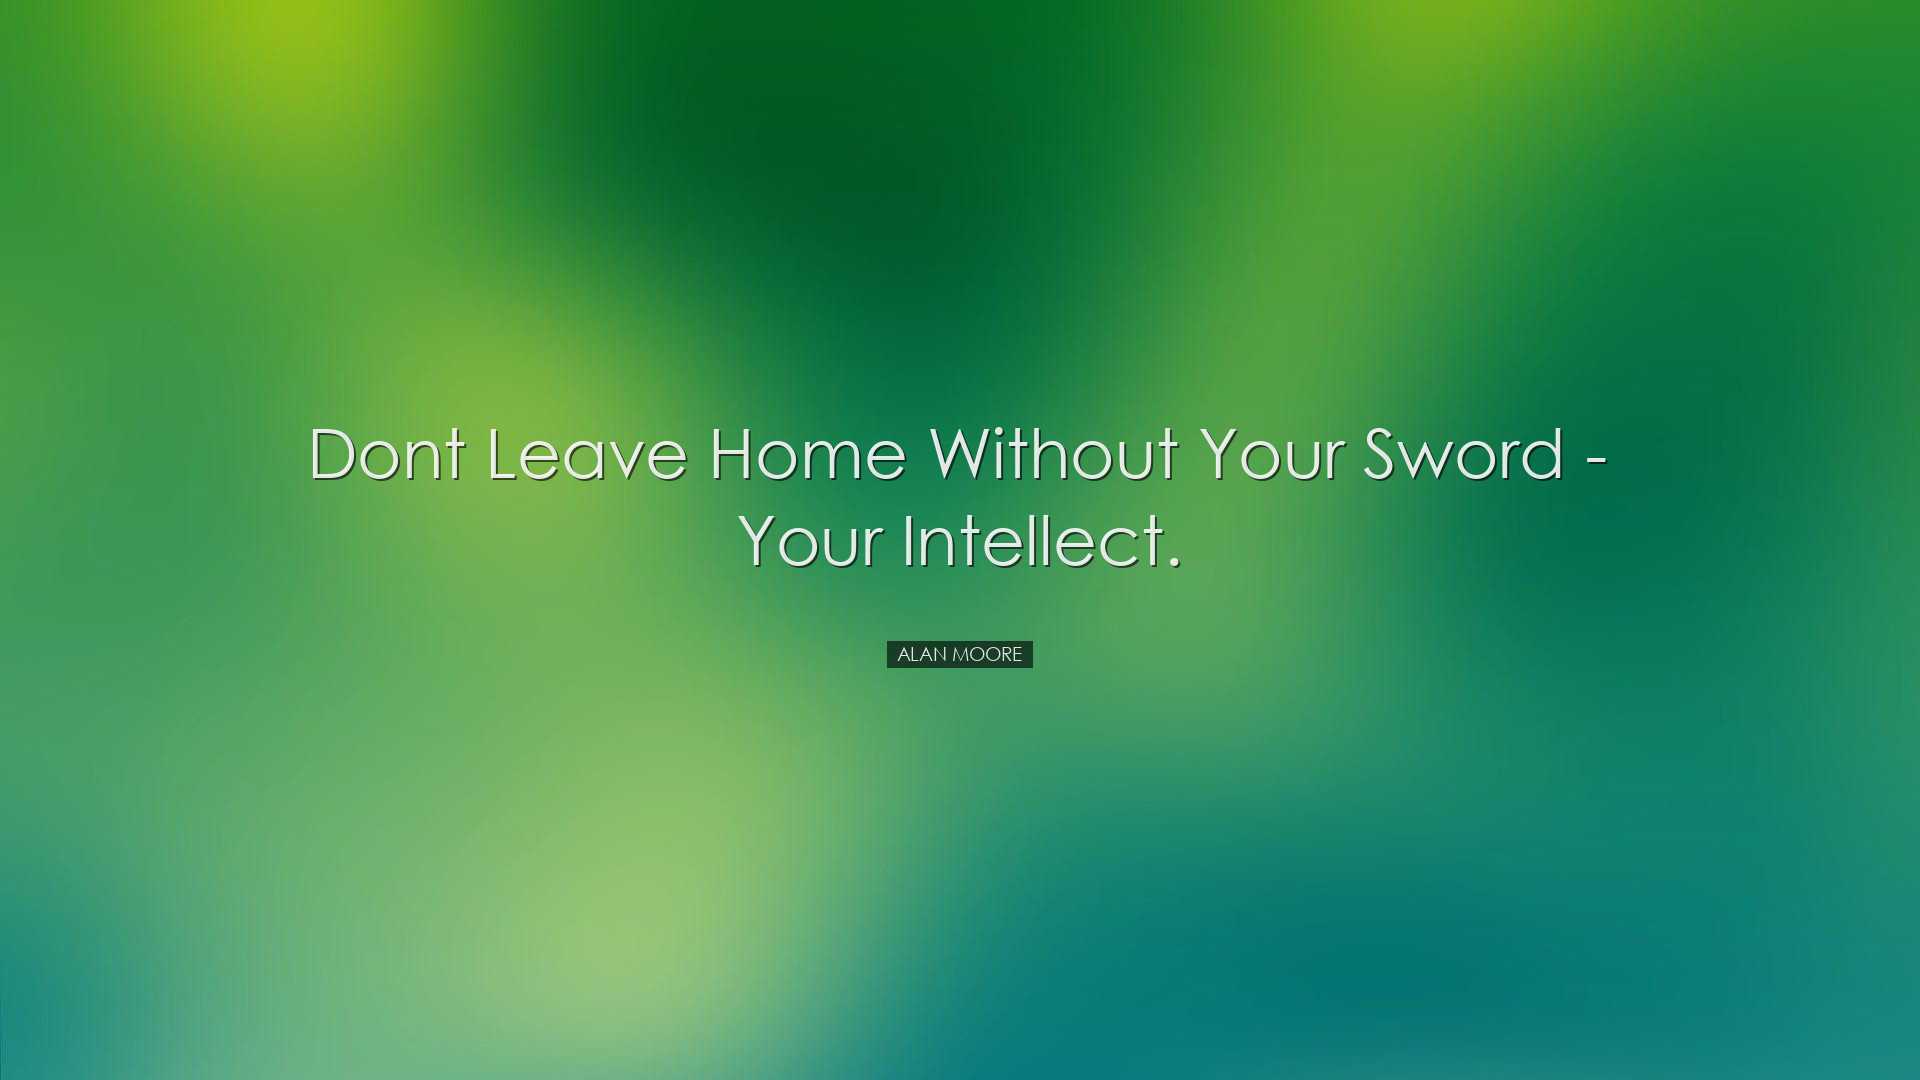 Dont leave home without your sword - your intellect. - Alan Moore